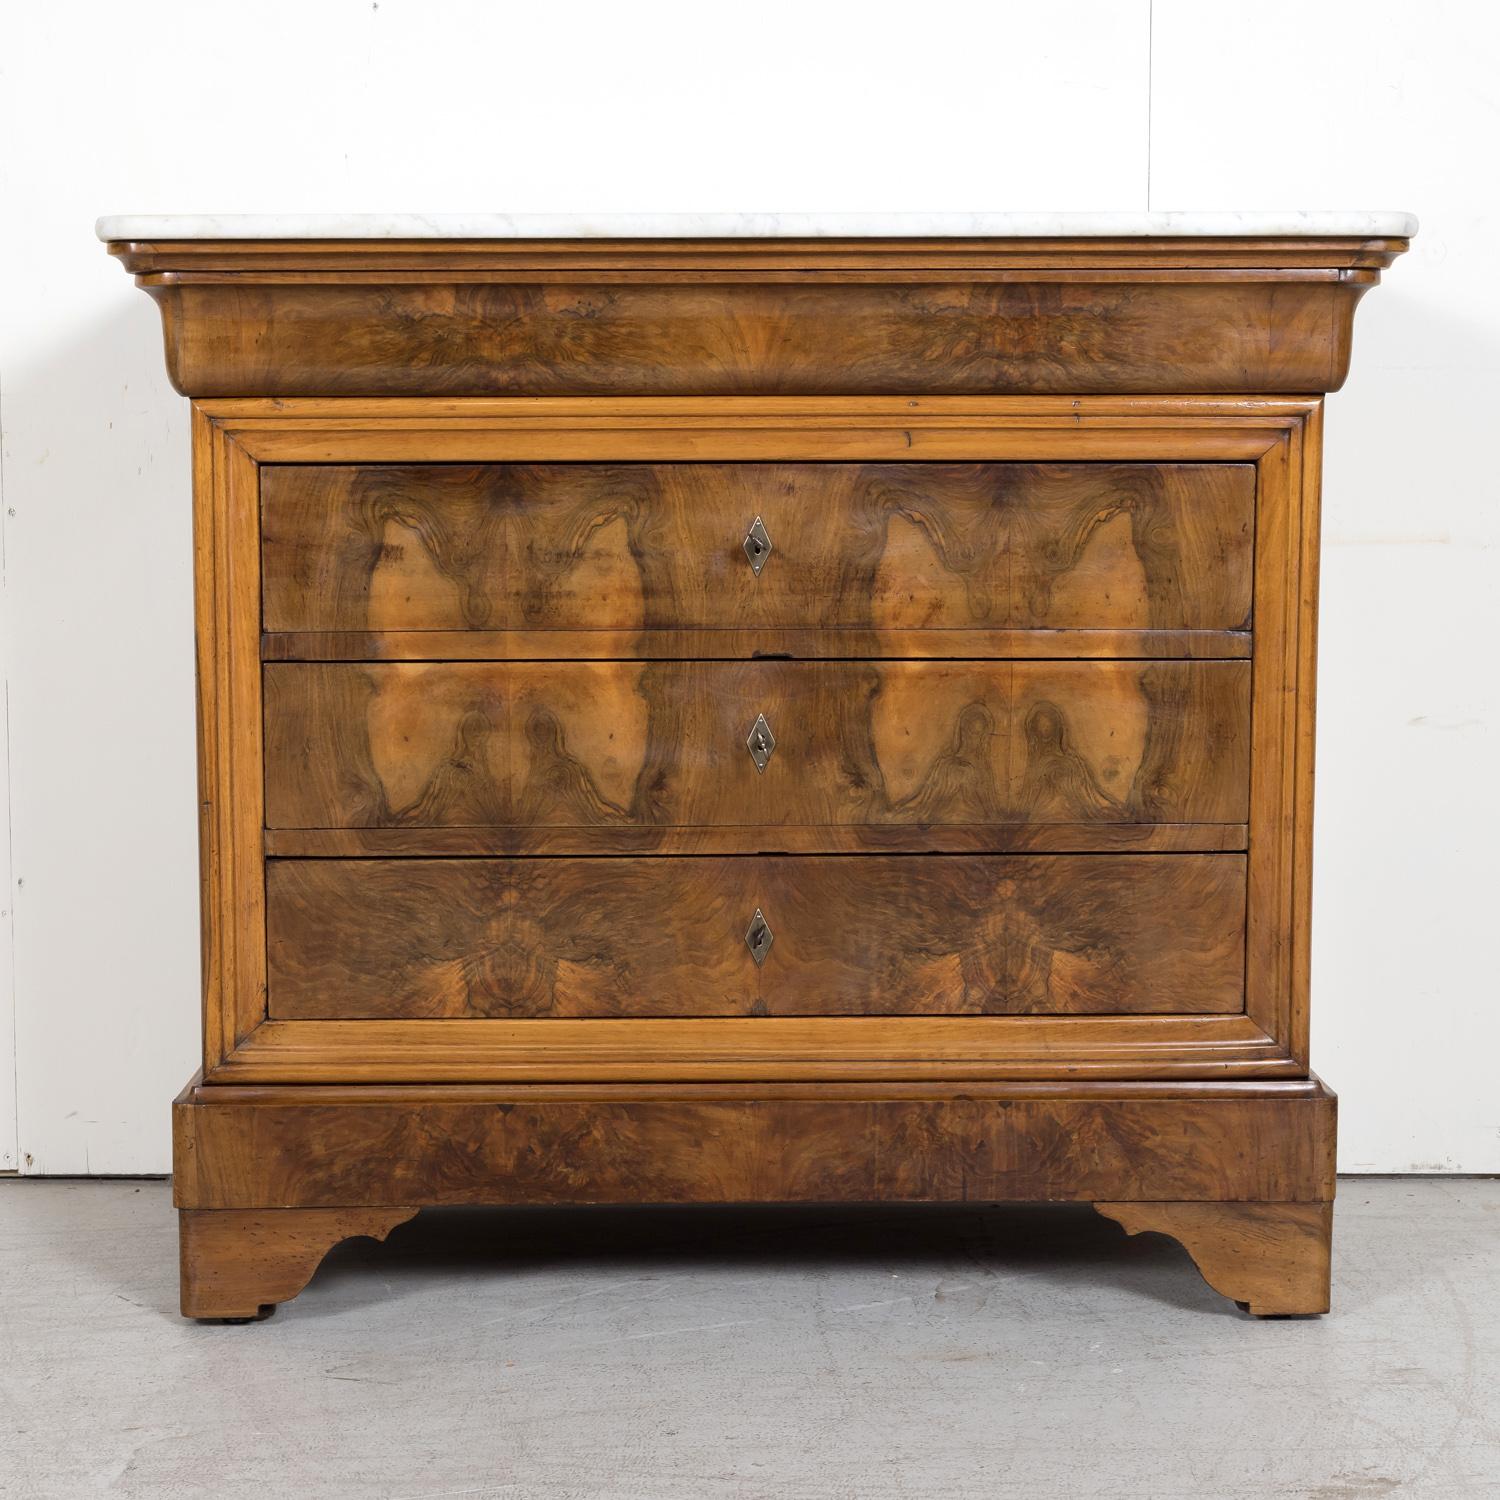 An exceptional 19th century French Louis Philippe period commode handcrafted of walnut by talented artisans in Provence near Avignon, circa 1830s, having the original white Carrara marble top with rounded corners resting above the typical hidden